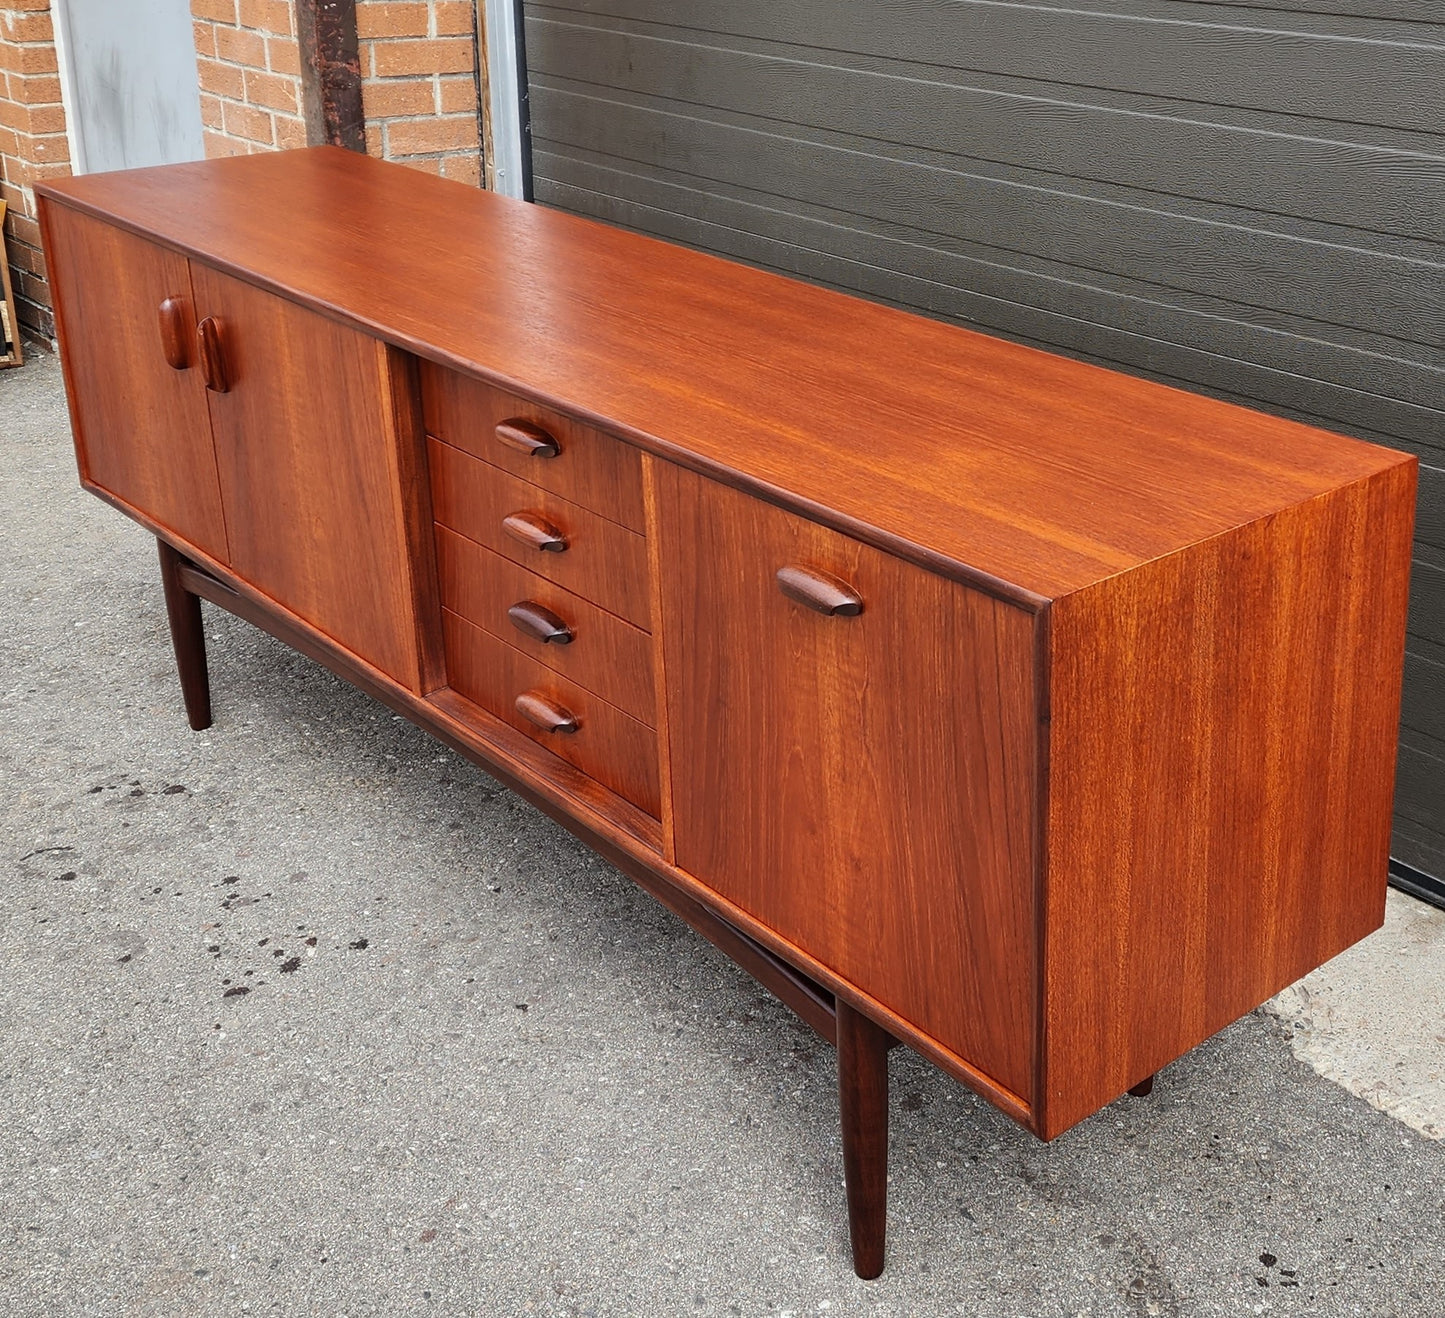 REFINISHED Mid Century Modern Sideboard by Victor B Wilkins for G-Plan 81"